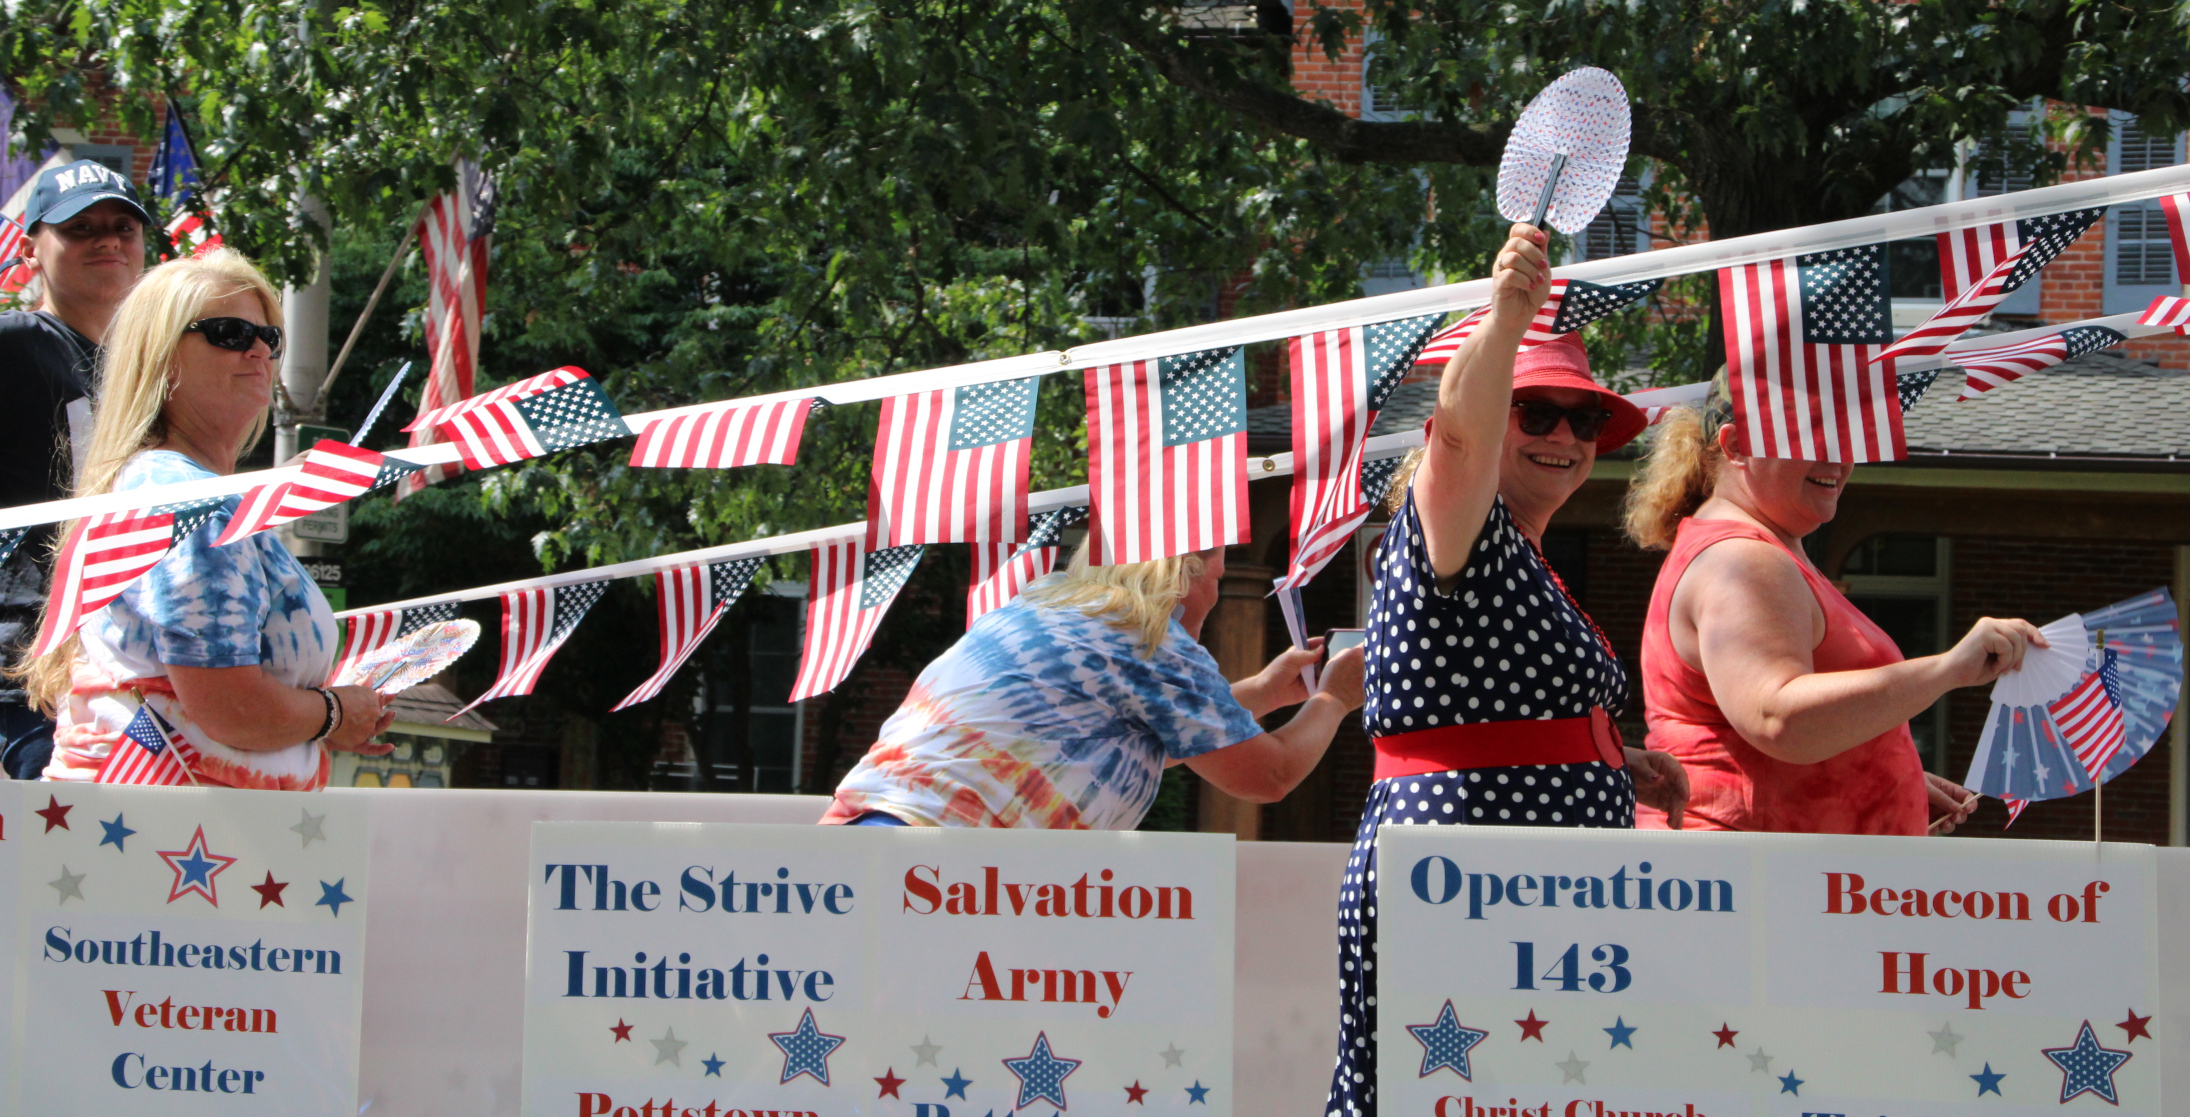 25 Photos, 3 Videos from Pottstown's Big July 4 Parade